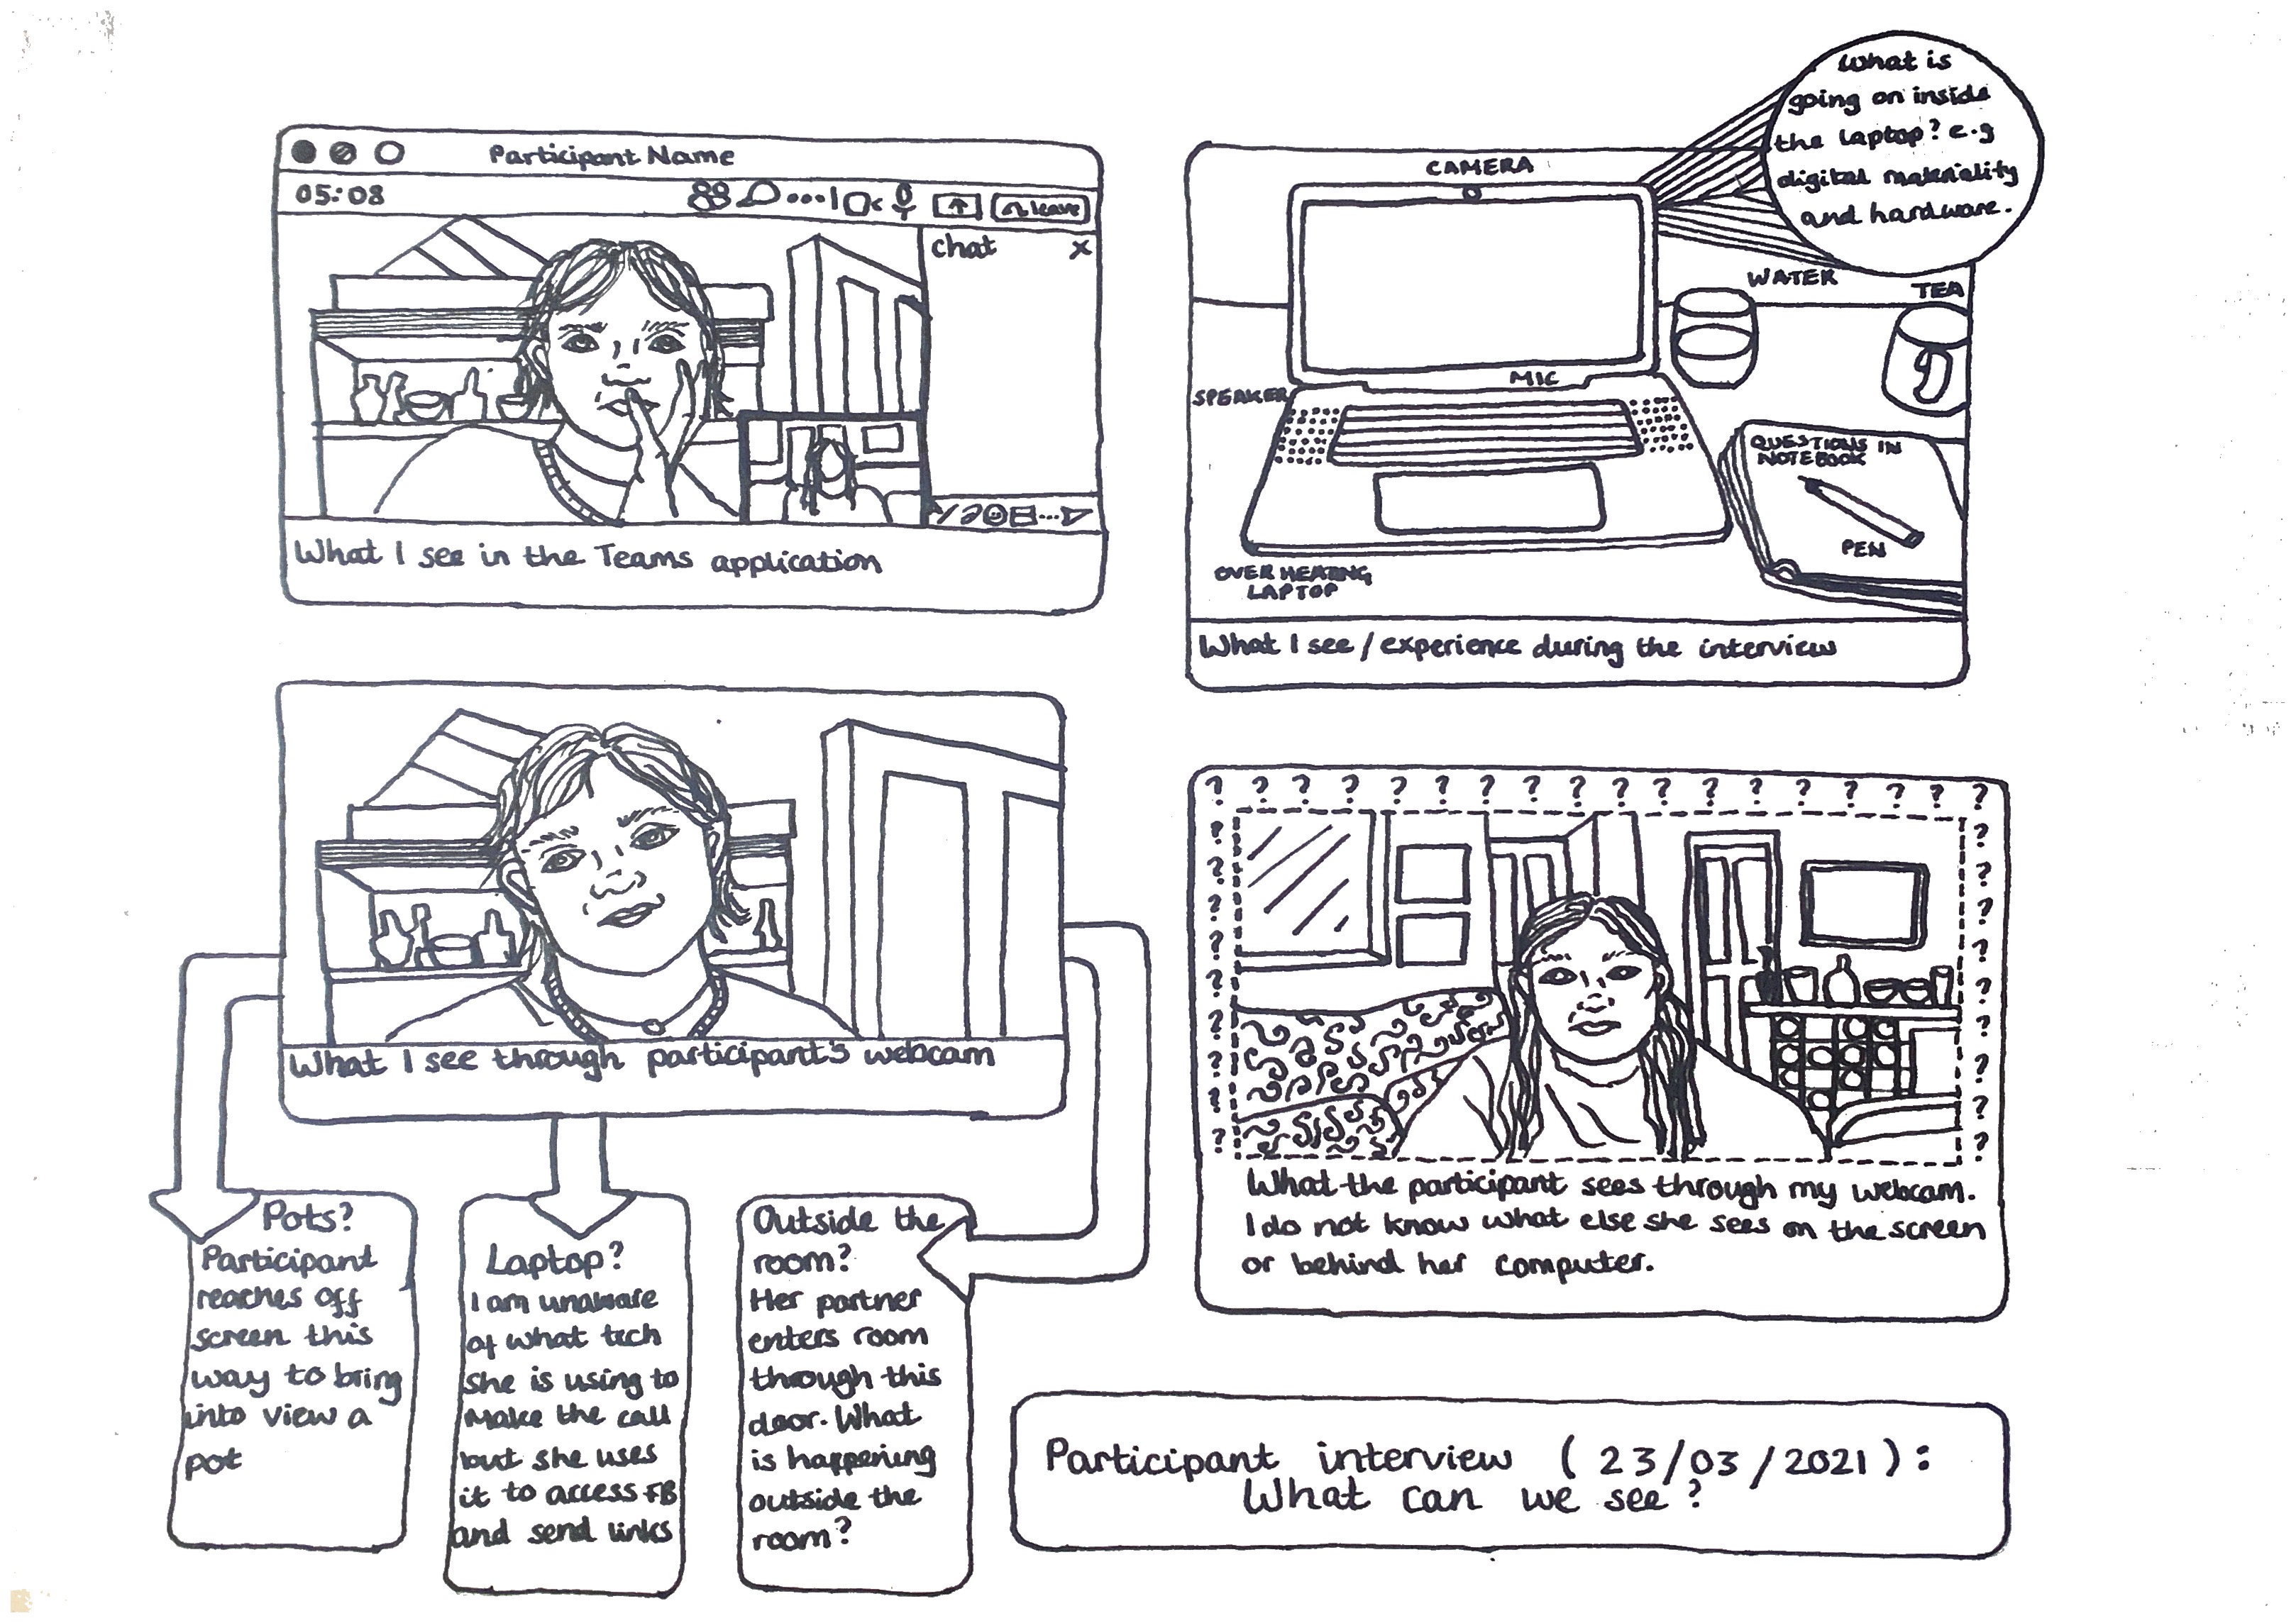 A line drawing in the style of a comic book showing what cathy saw when interviewing her participants over zoom. 